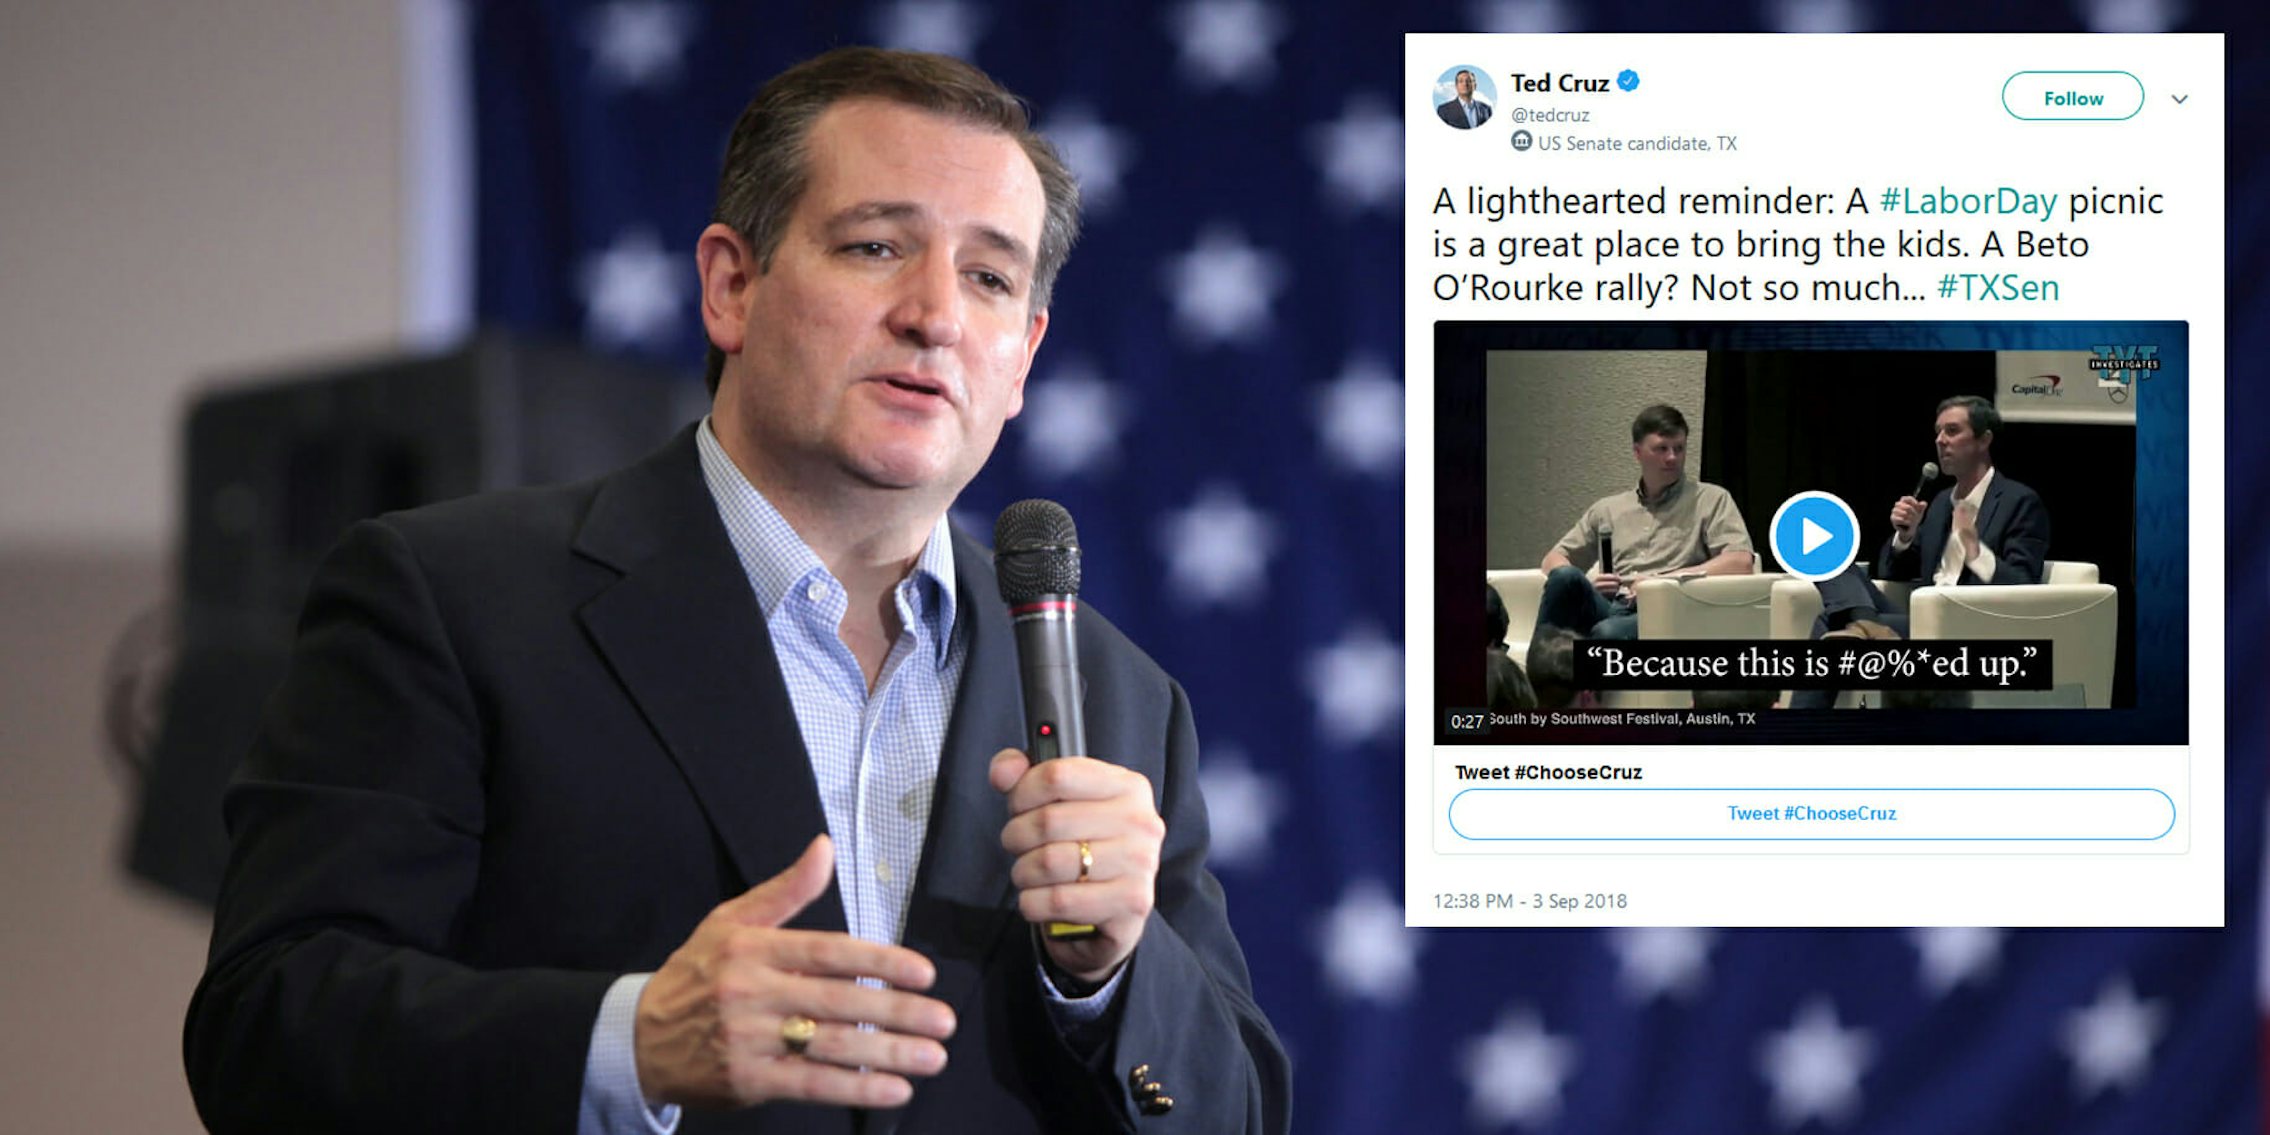 Sen. Ted Cruz released an ad on Labor Day that attacked his Democratic midterm opponent Beto O'Rourke for cursing during public events in the past.